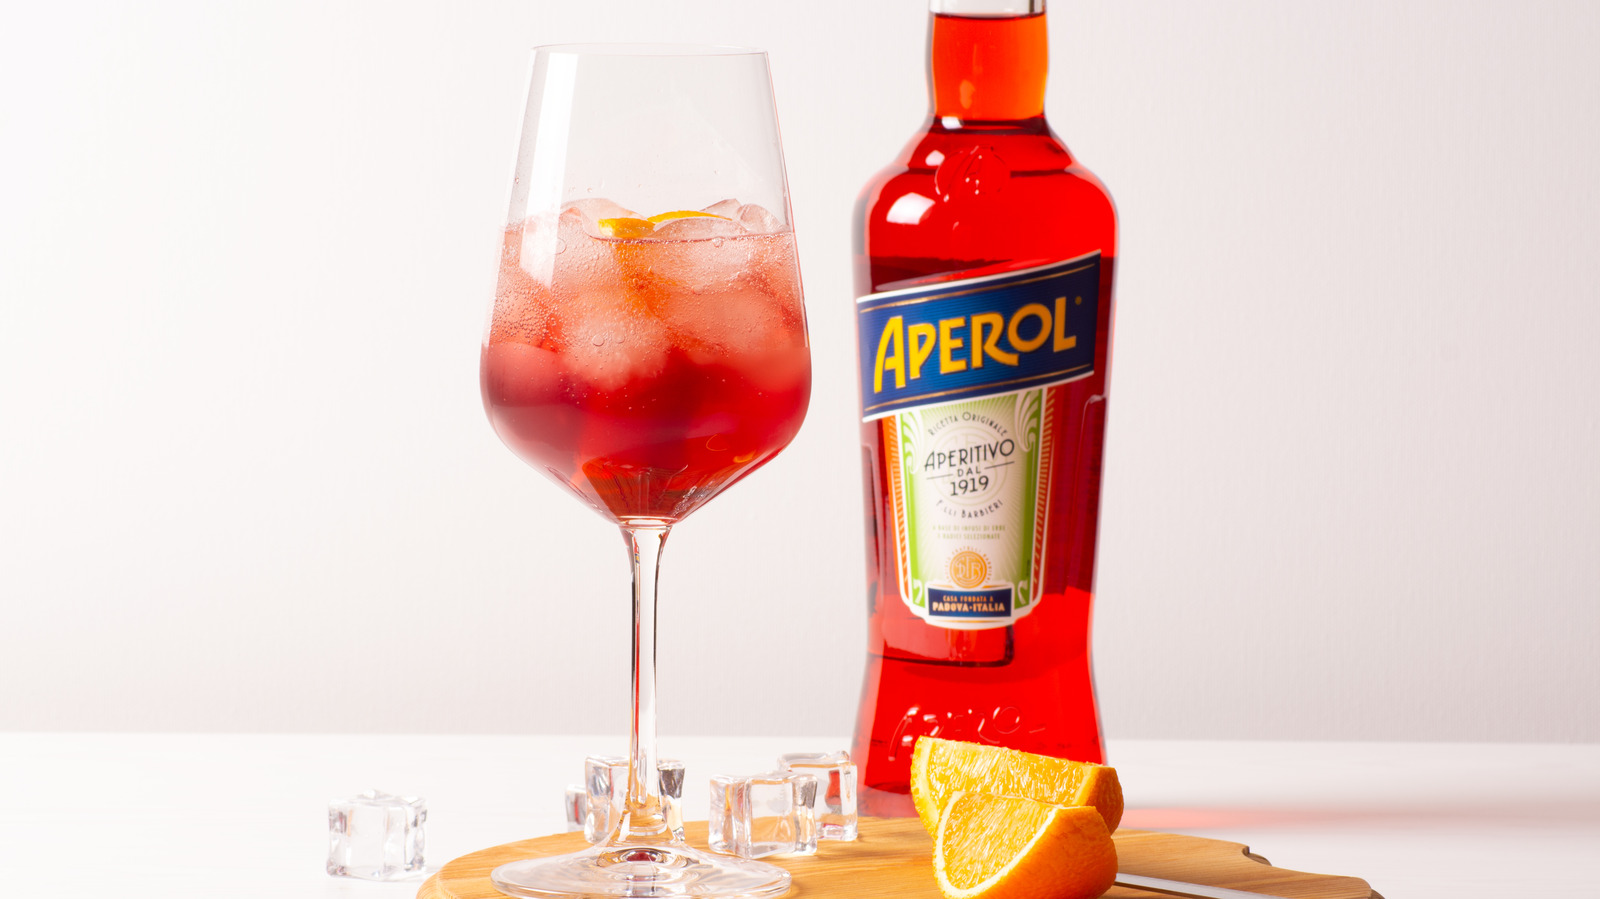 https://www.tastingtable.com/img/gallery/20-best-cocktails-to-make-with-aperol/l-intro-1648567251.jpg